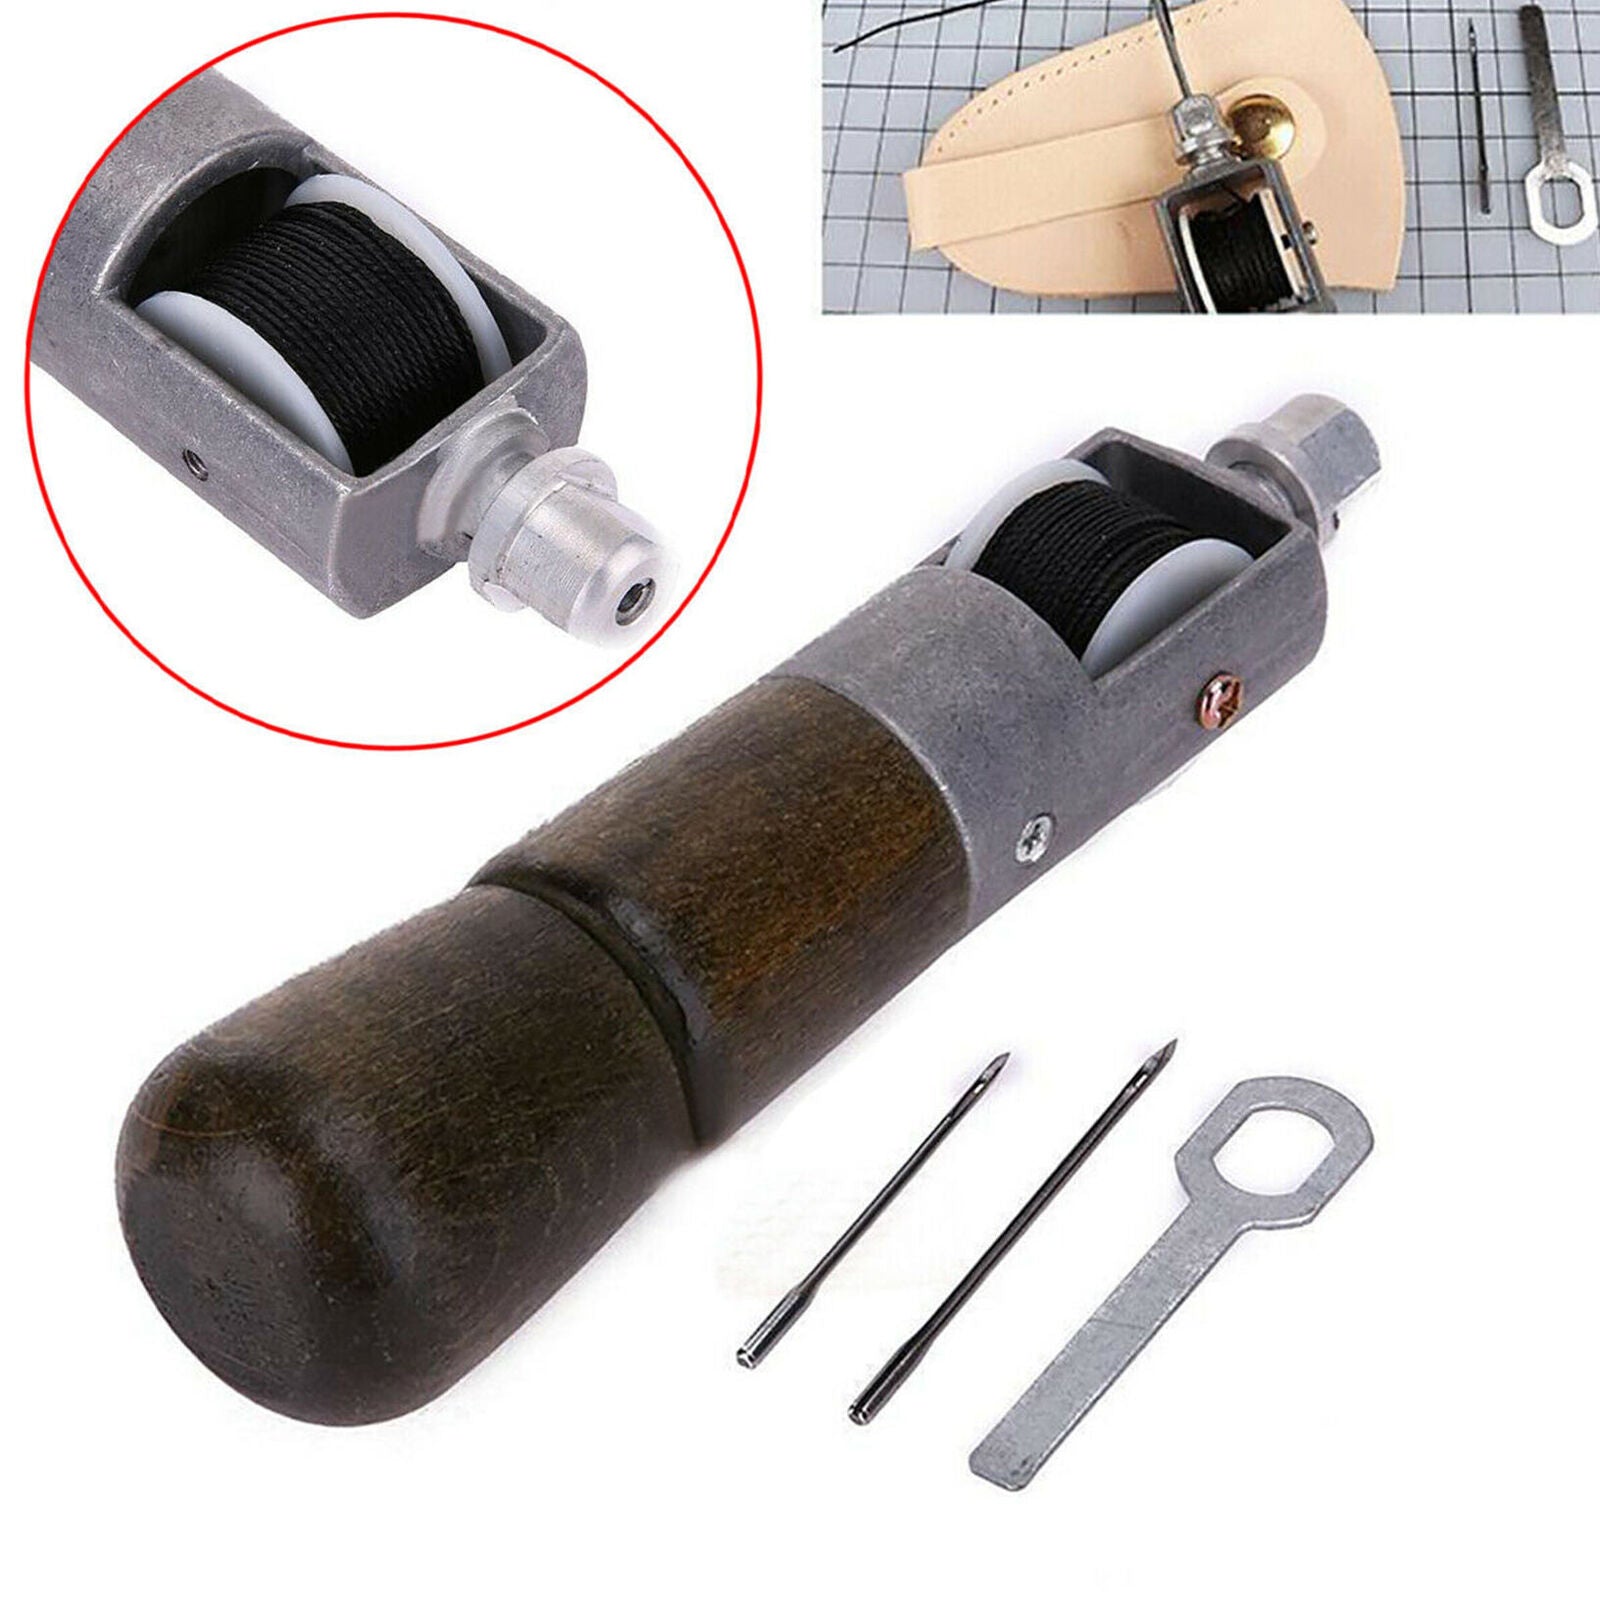 Leather Craft Automatic Lock Stitching Sewing Awl Tool+ Needle+Tightening Wrench